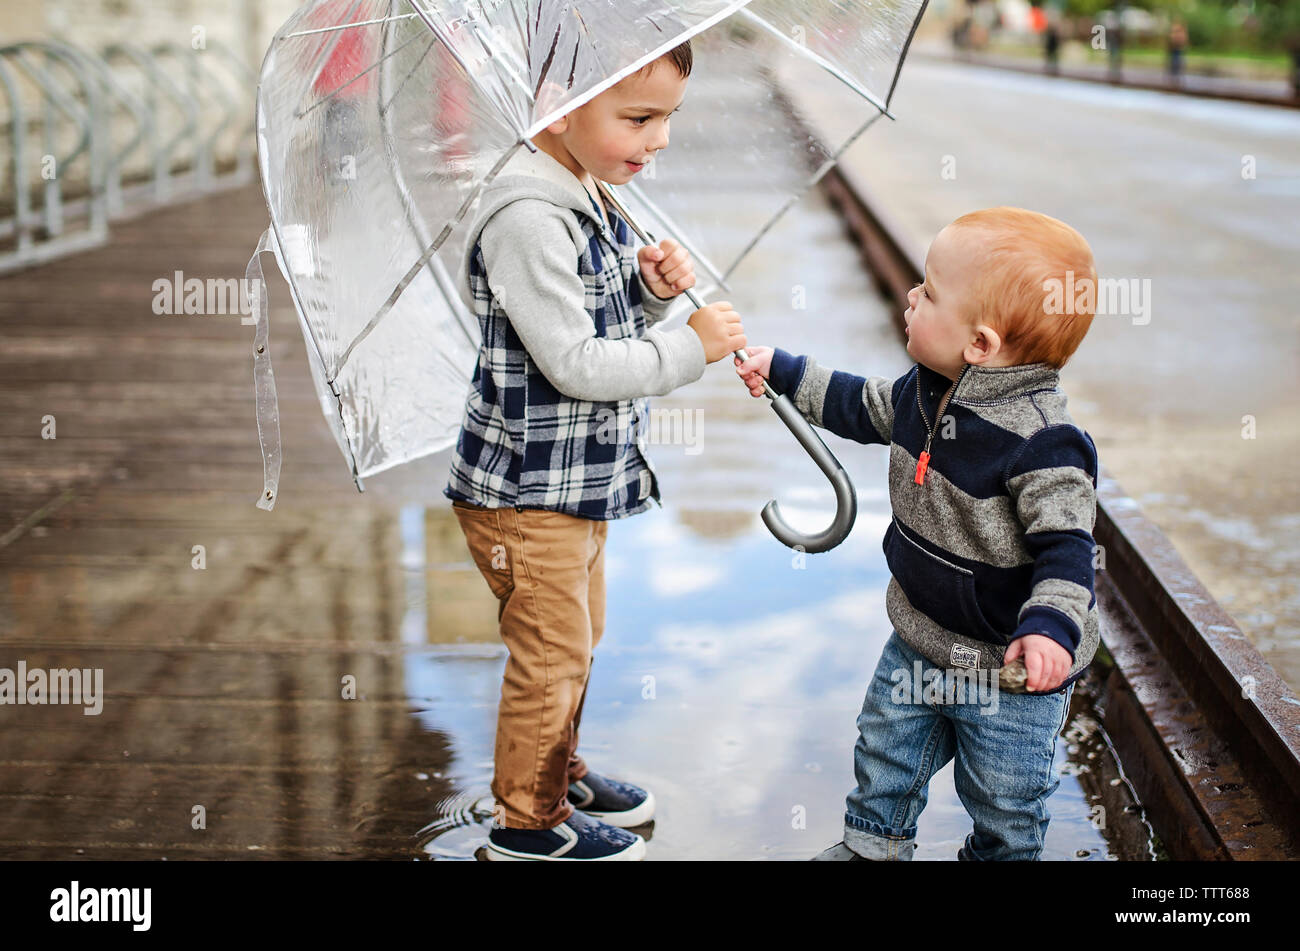 Baby boy with brother holding umbrella while standing on wet street Stock Photo